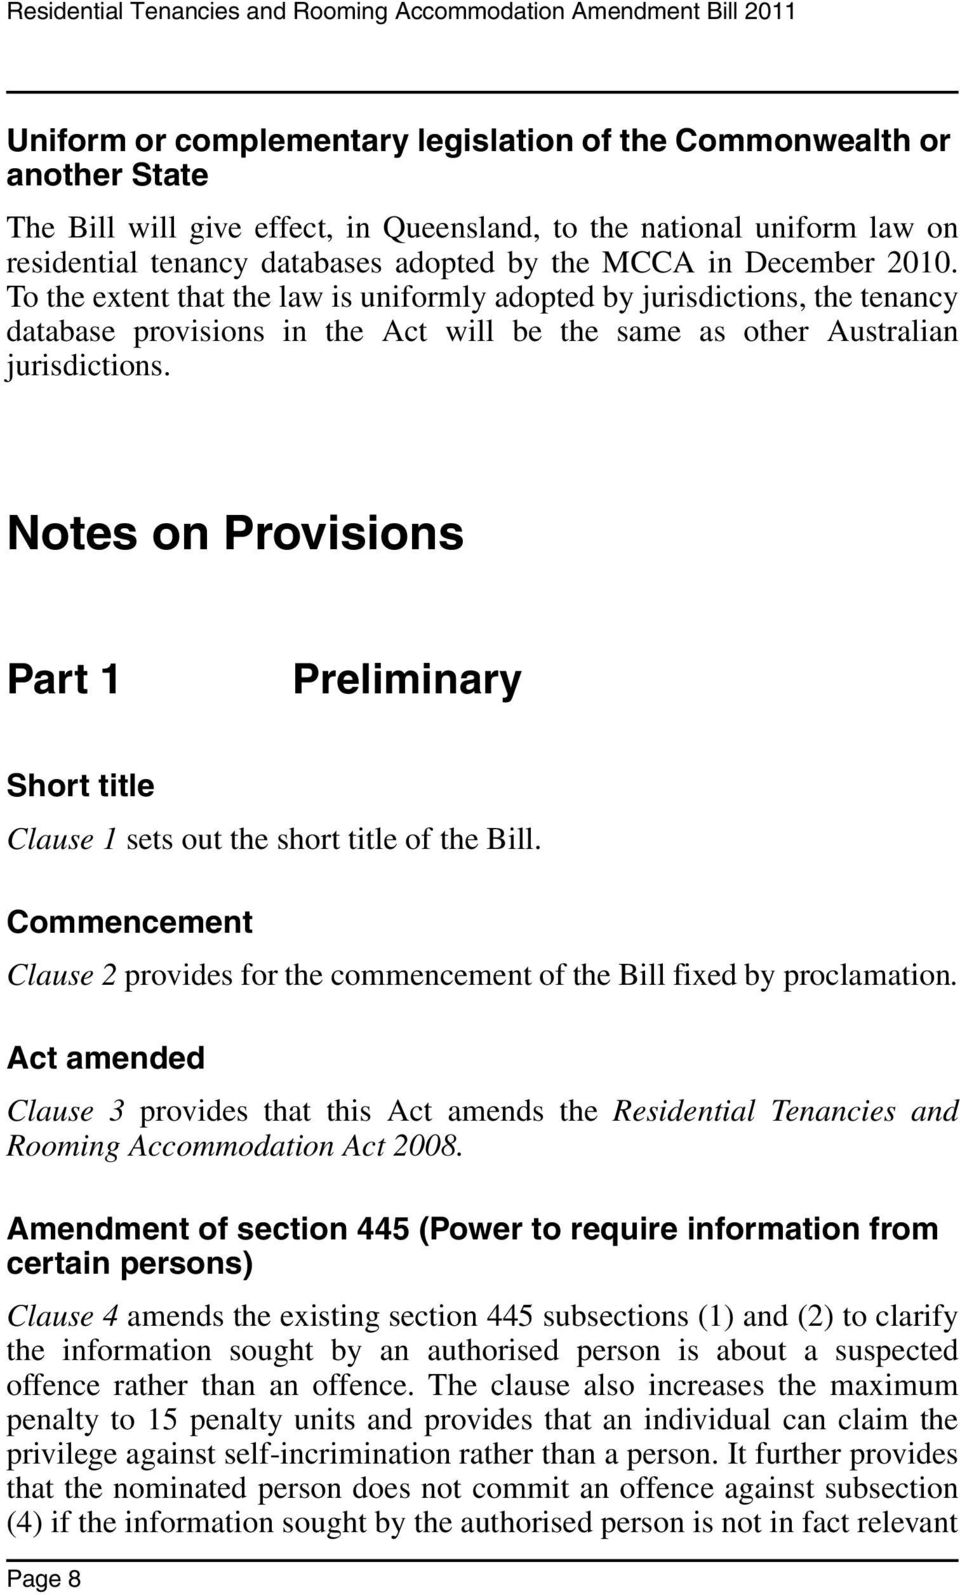 Notes on Provisions Part 1 Preliminary Short title Clause 1 sets out the short title of the Bill. Commencement Clause 2 provides for the commencement of the Bill fixed by proclamation.